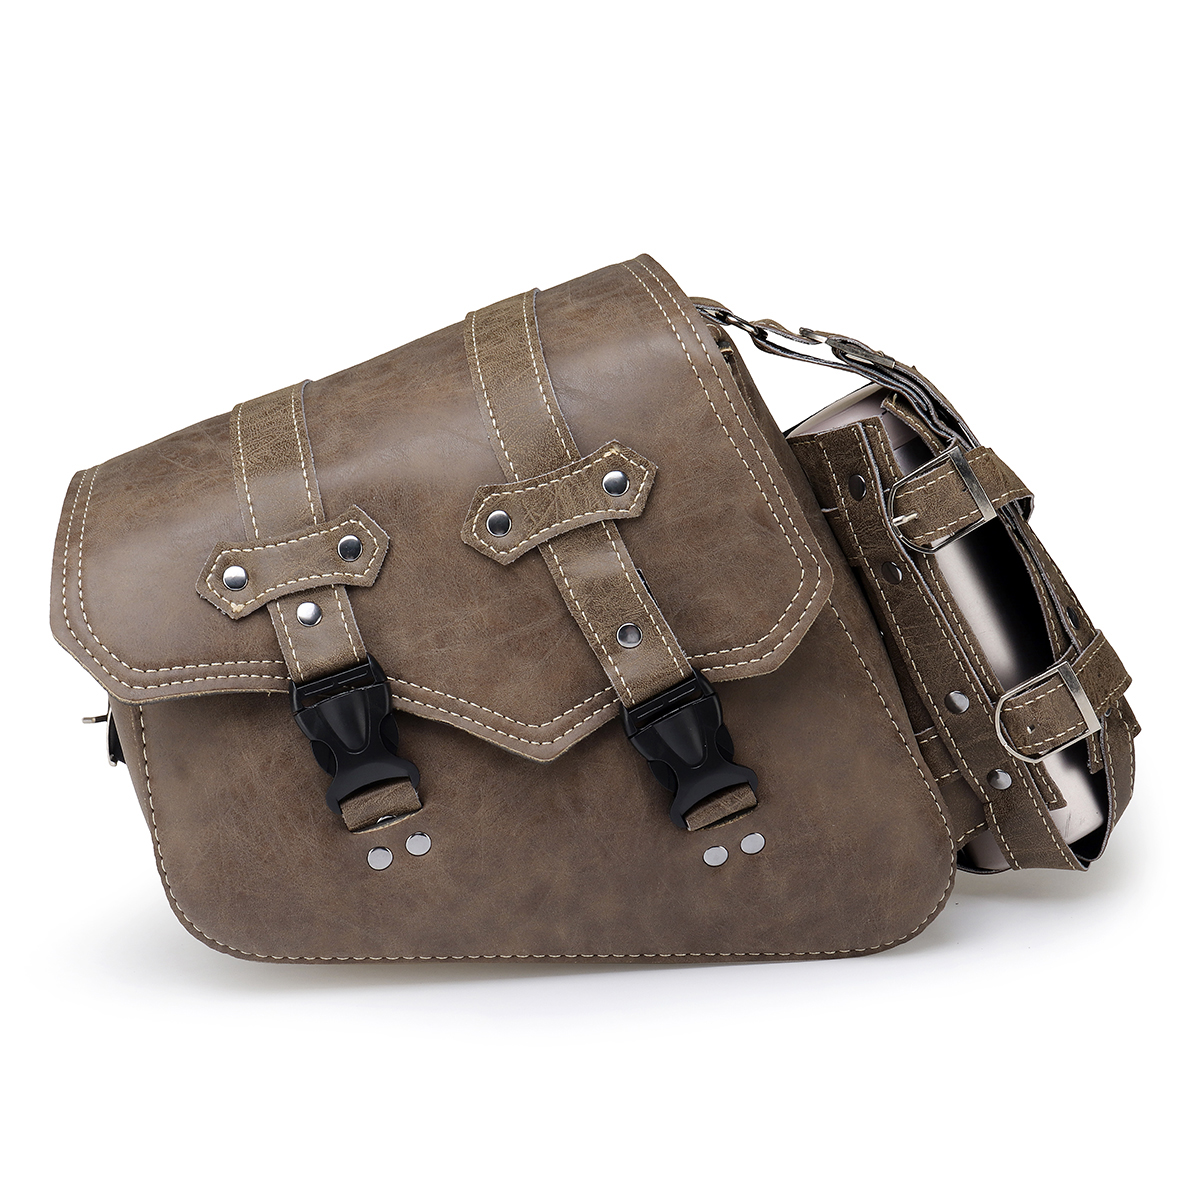 Left-Right-Side-Universal-Motorcycle-Saddlebag-Tool-Storage-Waterproof-PU-Leather-Panniers-Bag-with--1863605-3